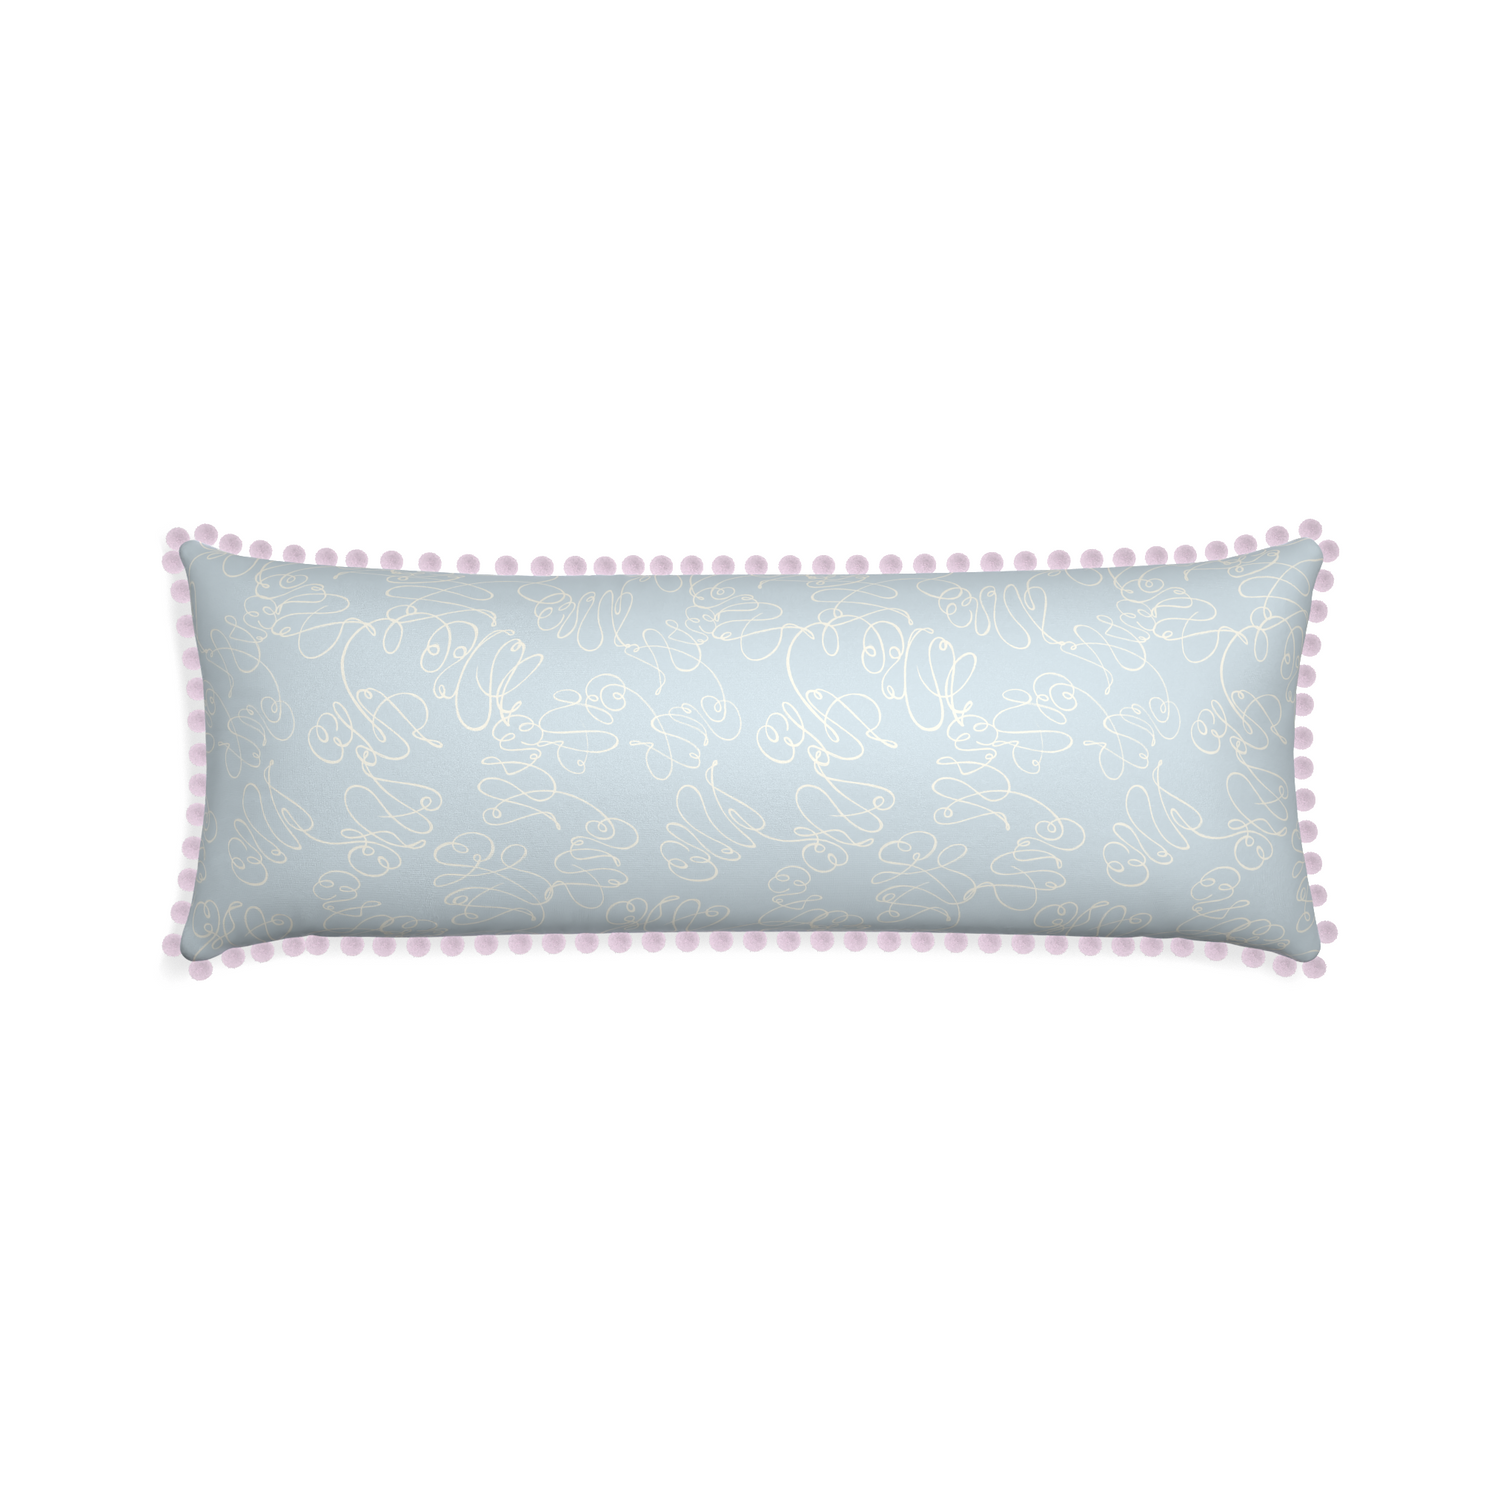 Xl-lumbar mirabella custom pillow with l on white background